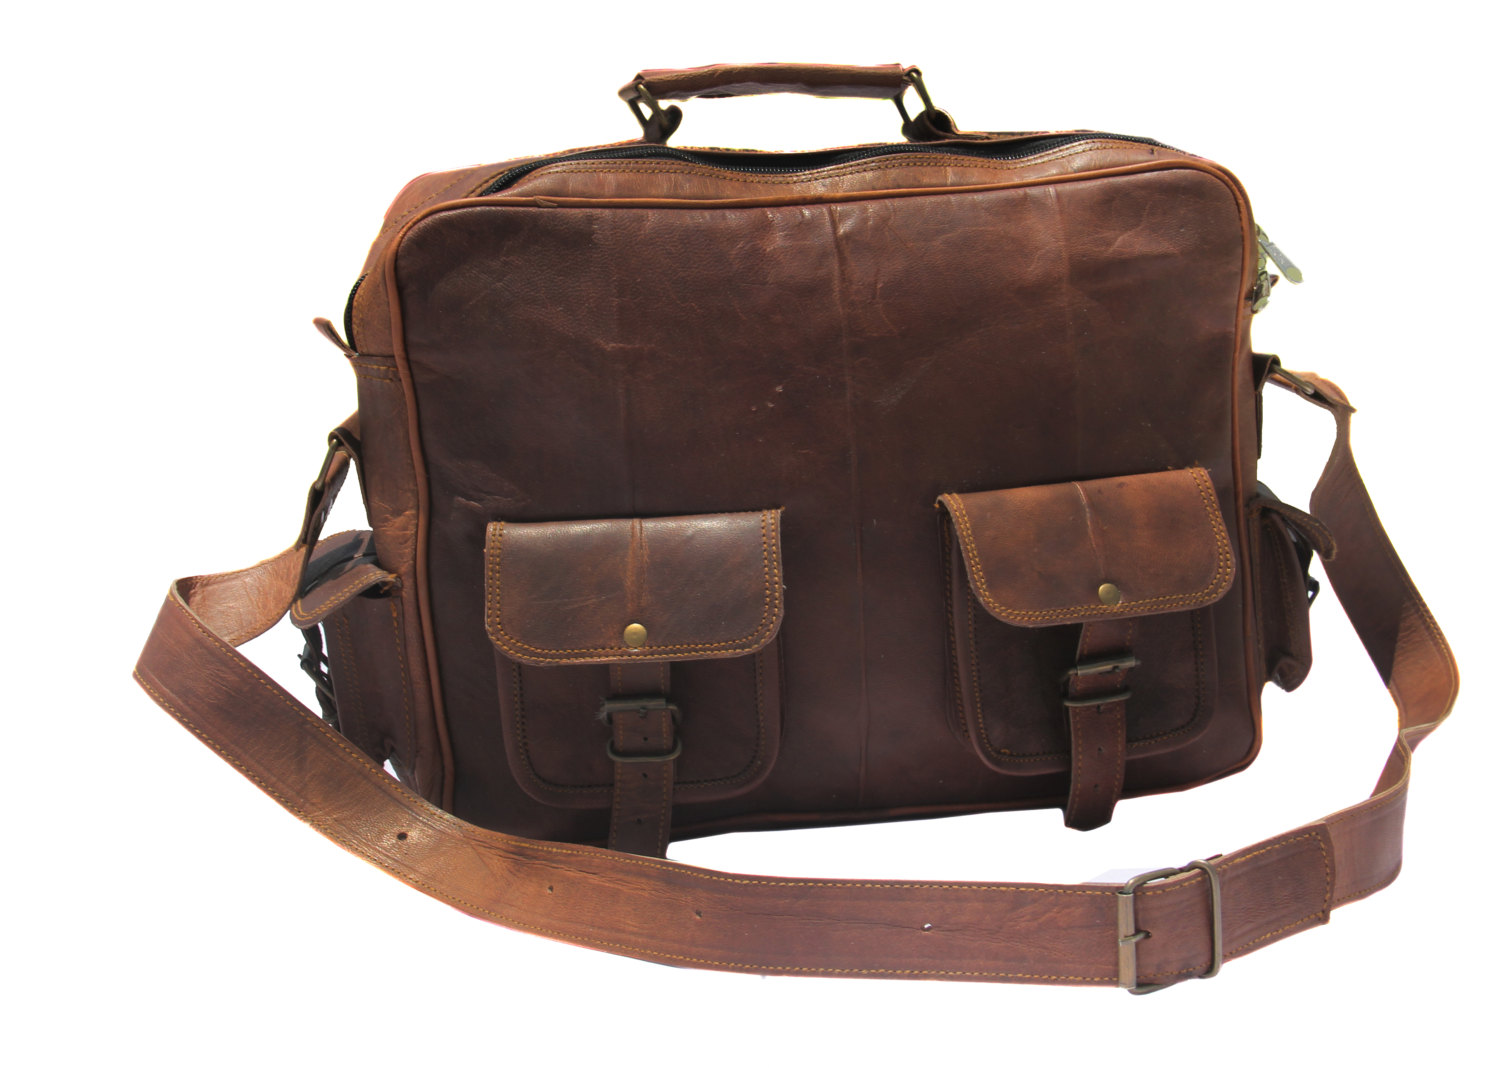 Messenger Bag For Office Dark Brown Leather Authentic on Luulla